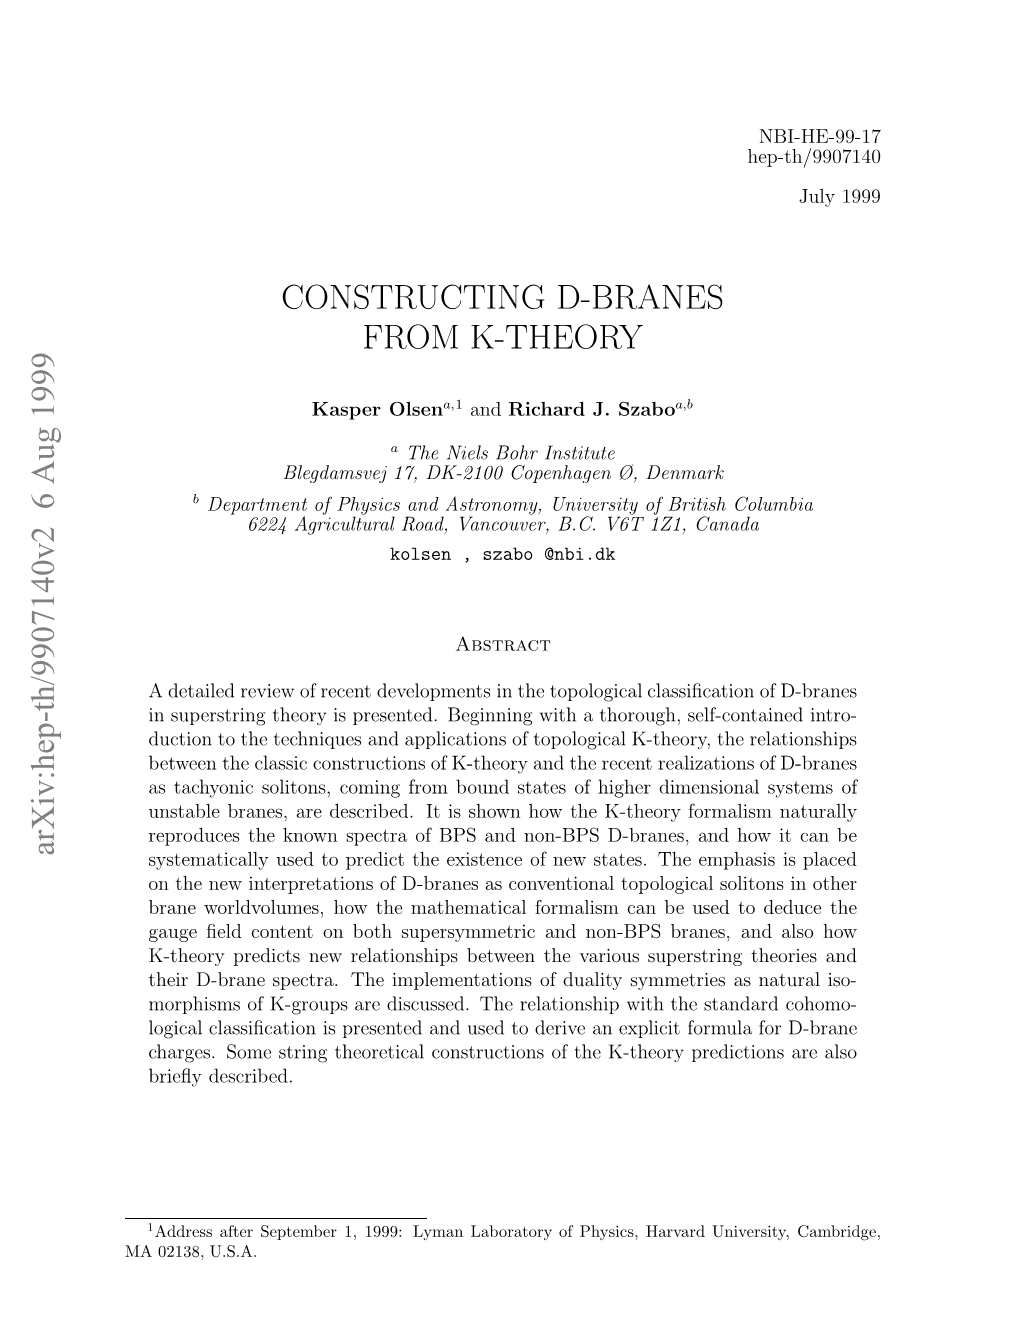 Constructing D-Branes from K-Theory